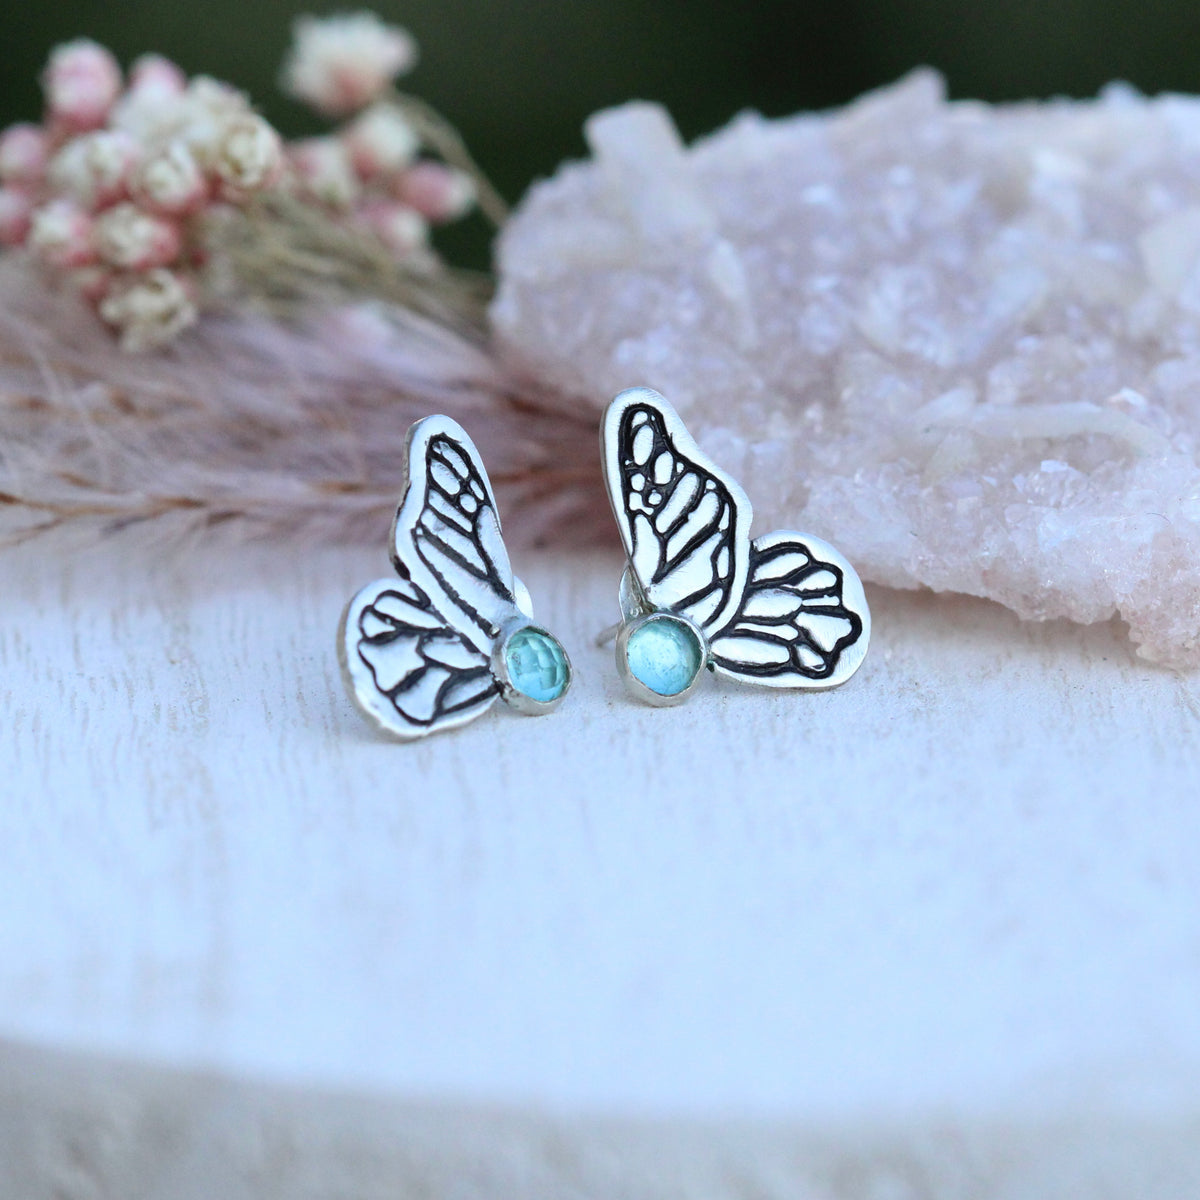 Painted Lady Butterfly post earrings with blue apatite